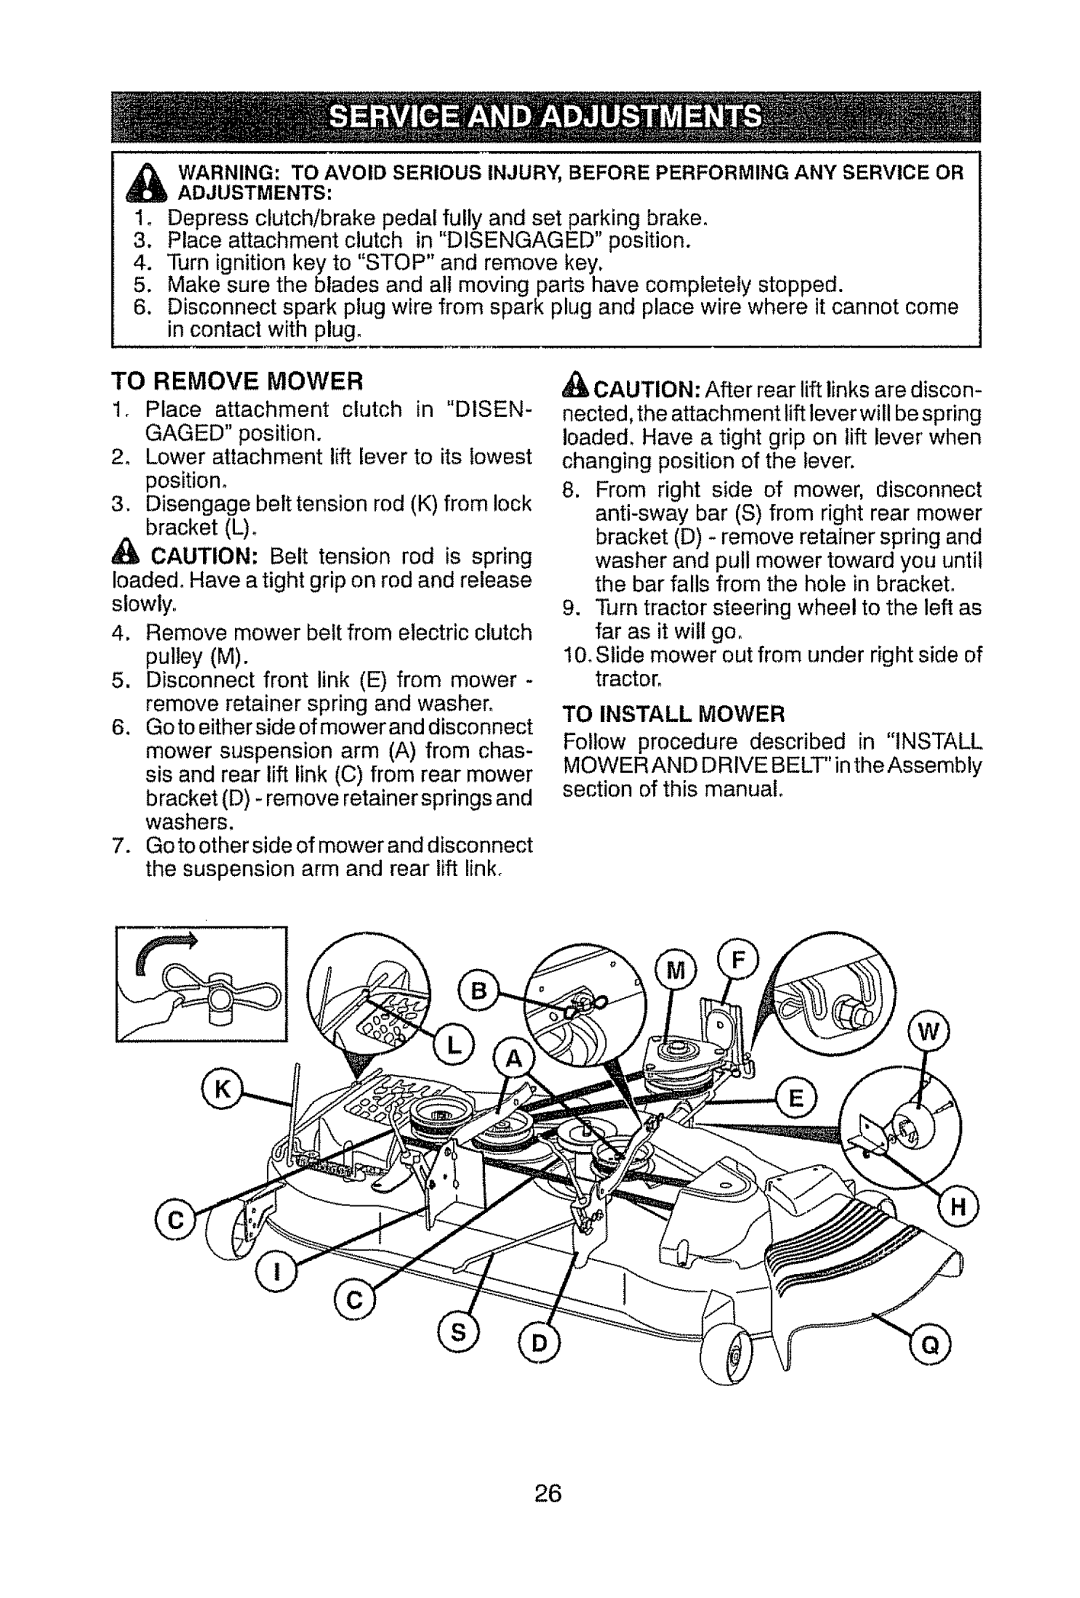 Craftsman 917.289470 manual To Remove Mower, Place attachment clutch in DISEN, Adjustments 